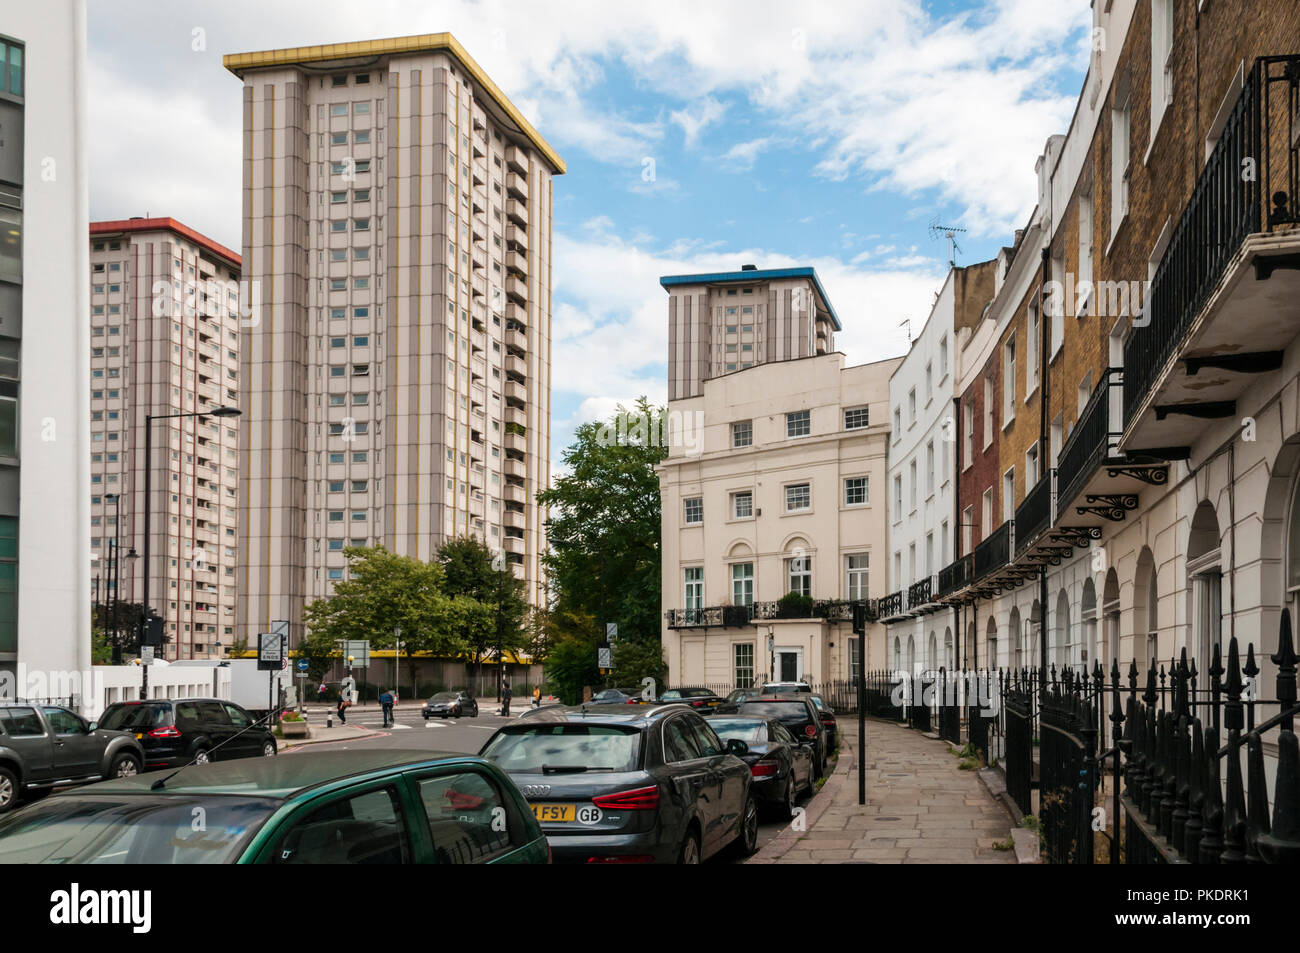 Tower blocks on the Ampthill Square estate in Camden seen at the end of Mornington Crescent. Oxenholme, Dalehead & Gillfoot towers visible L-R. Stock Photo